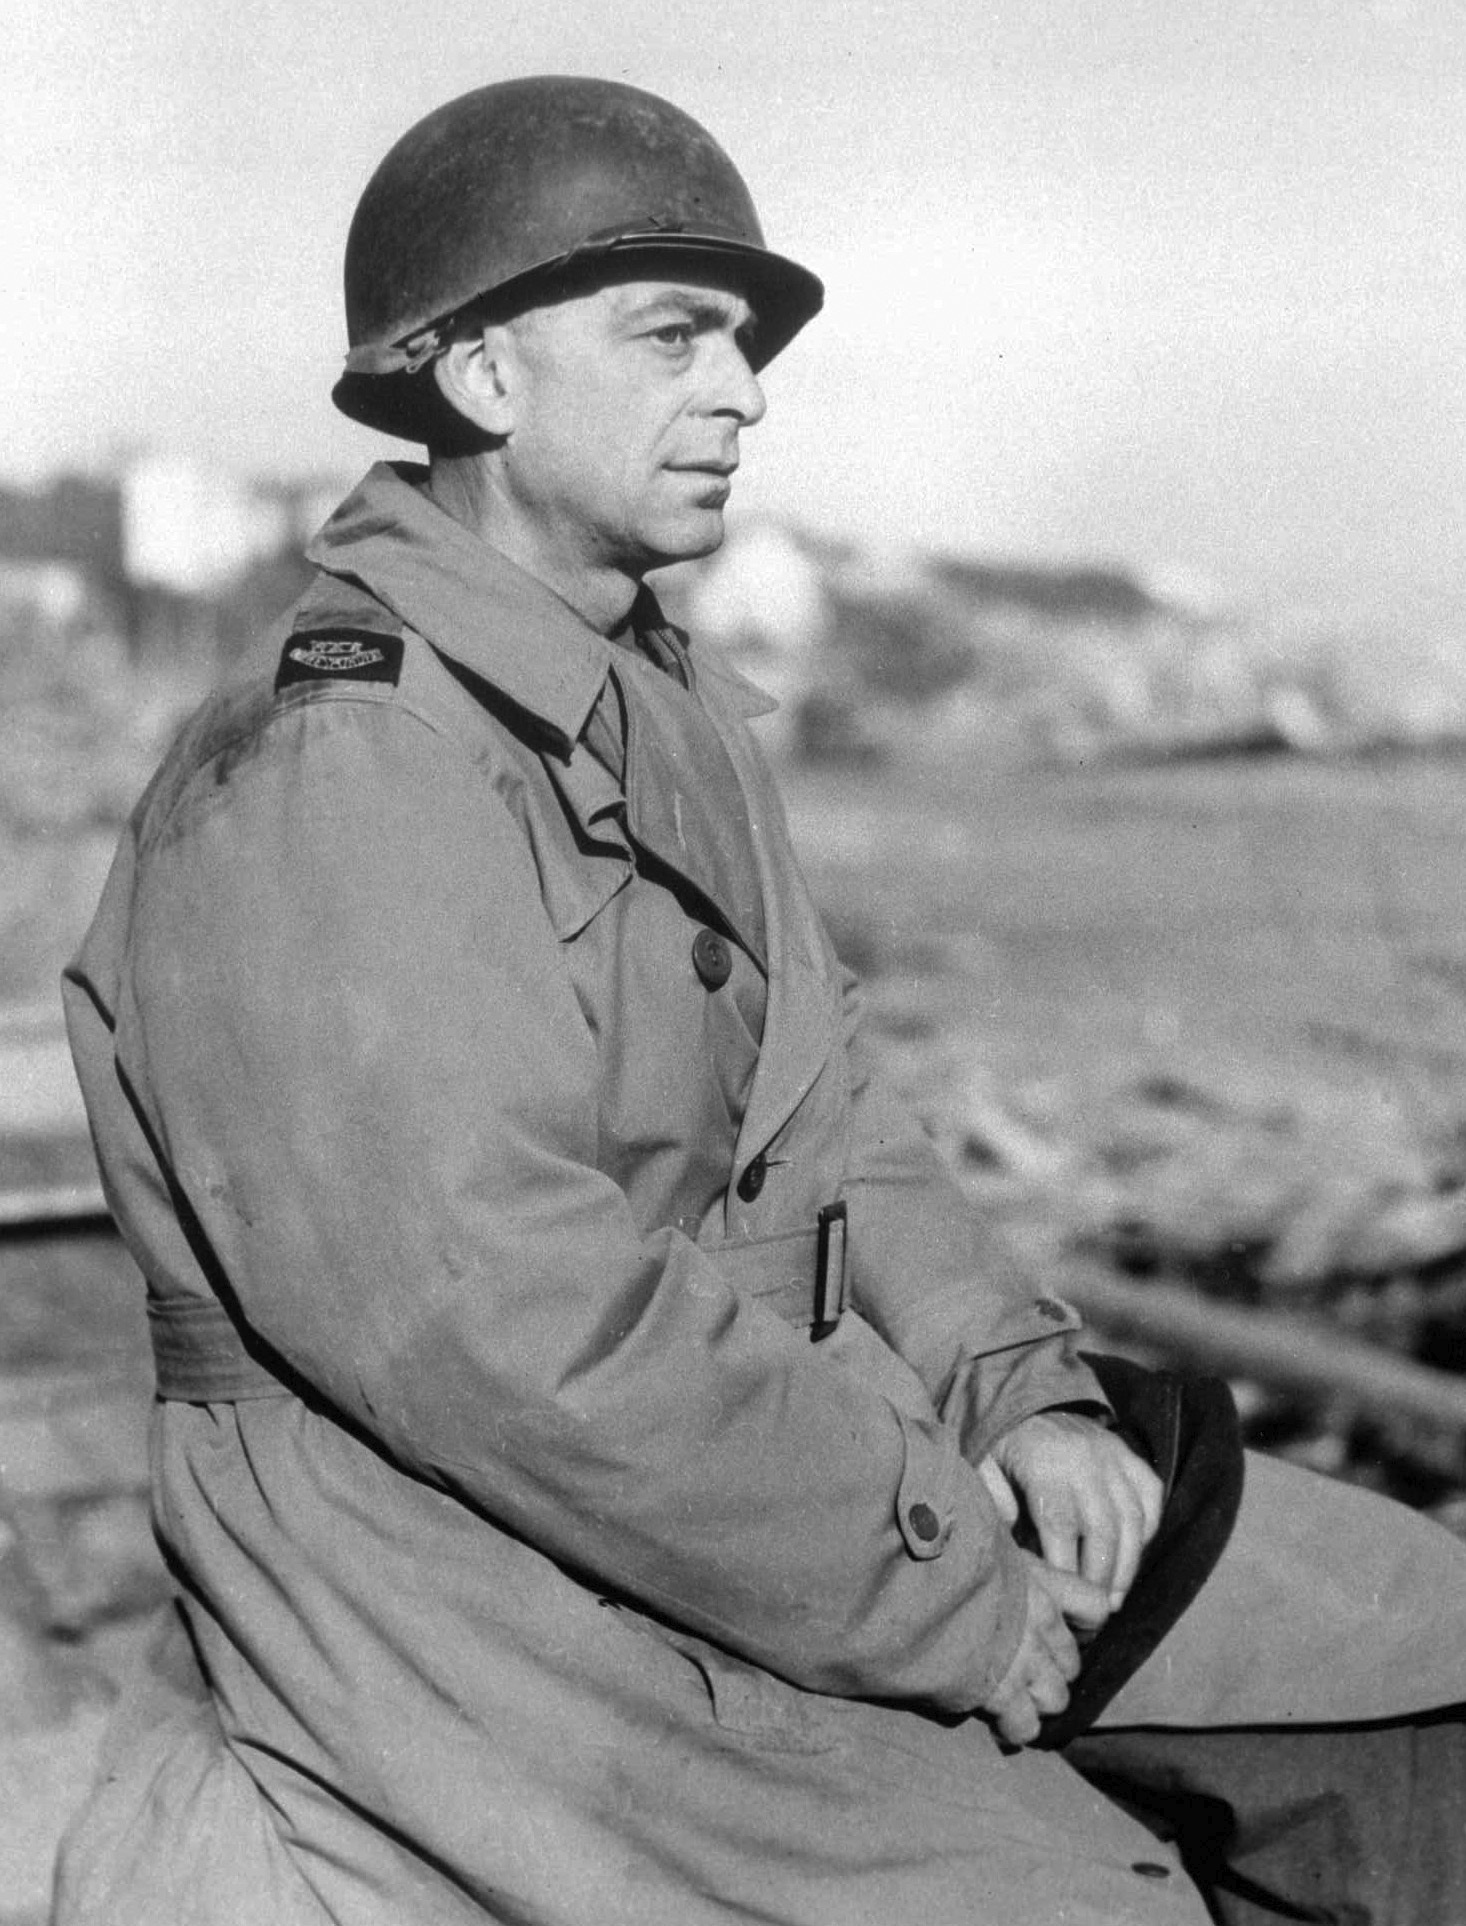 black and white picture of a man in world war two US military garb and a helmet, he is sitting so only his profile is visible from the side